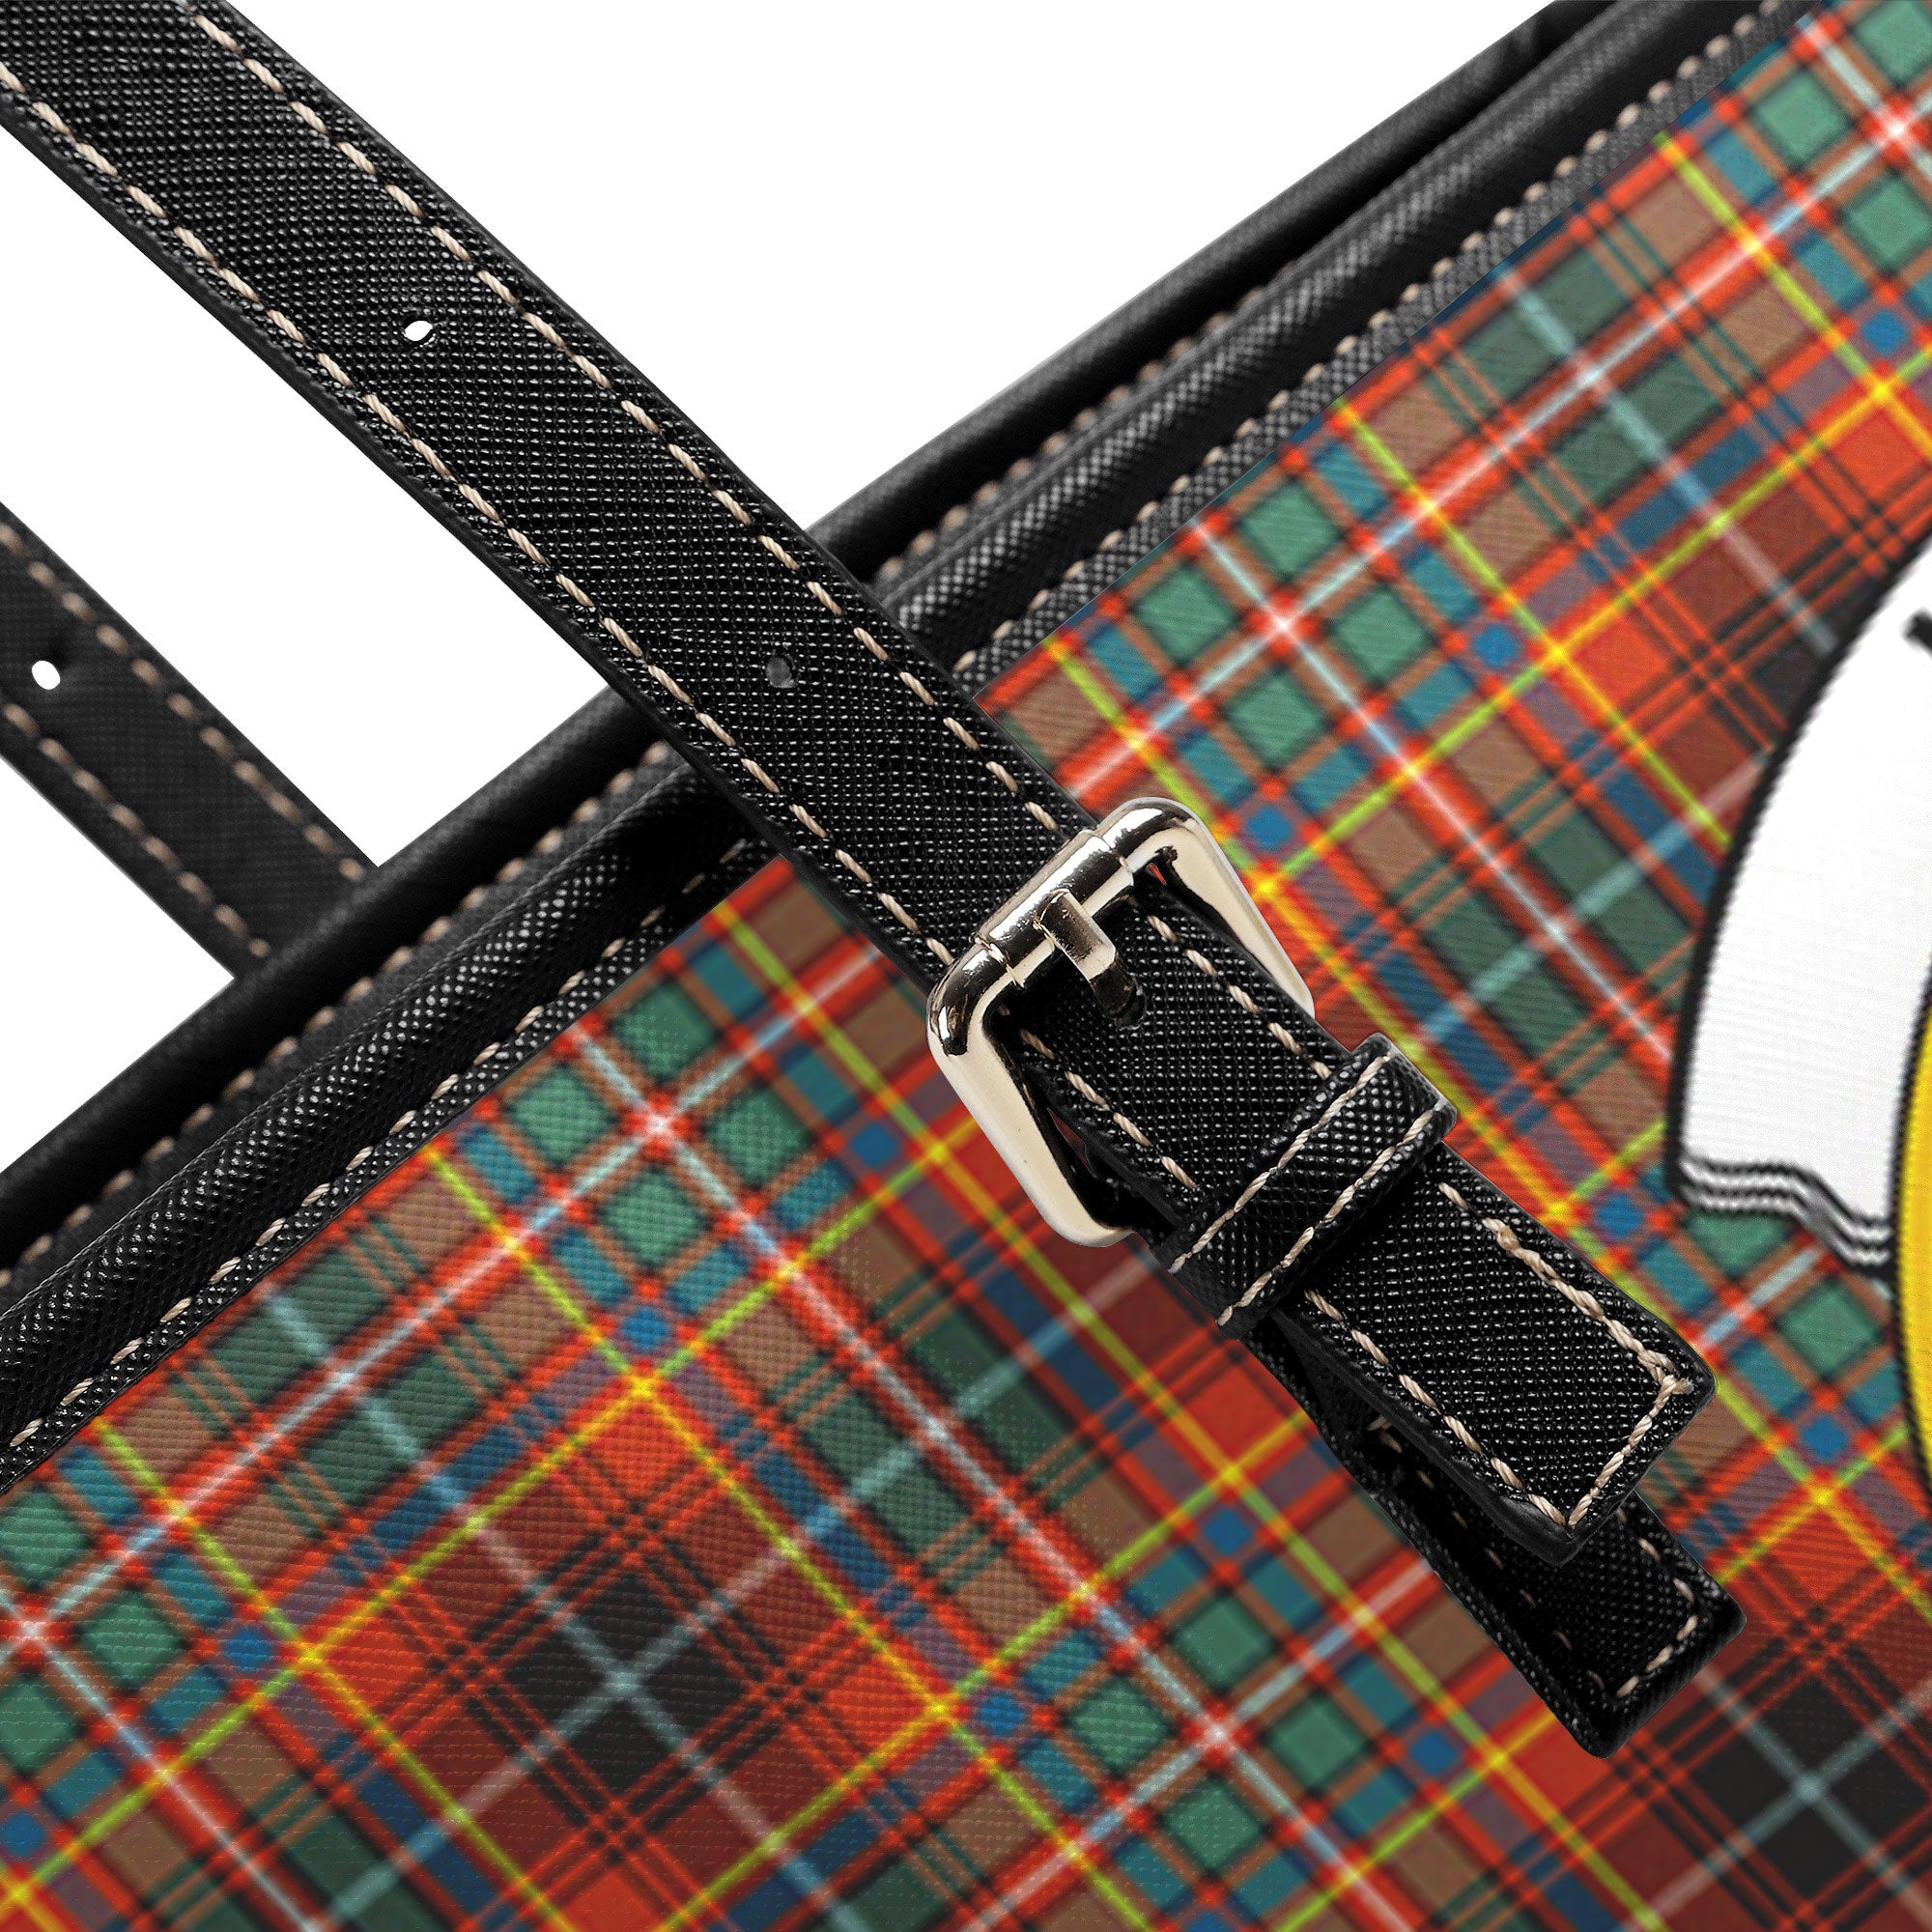 Innes Ancient Tartan Crest Leather Tote Bag